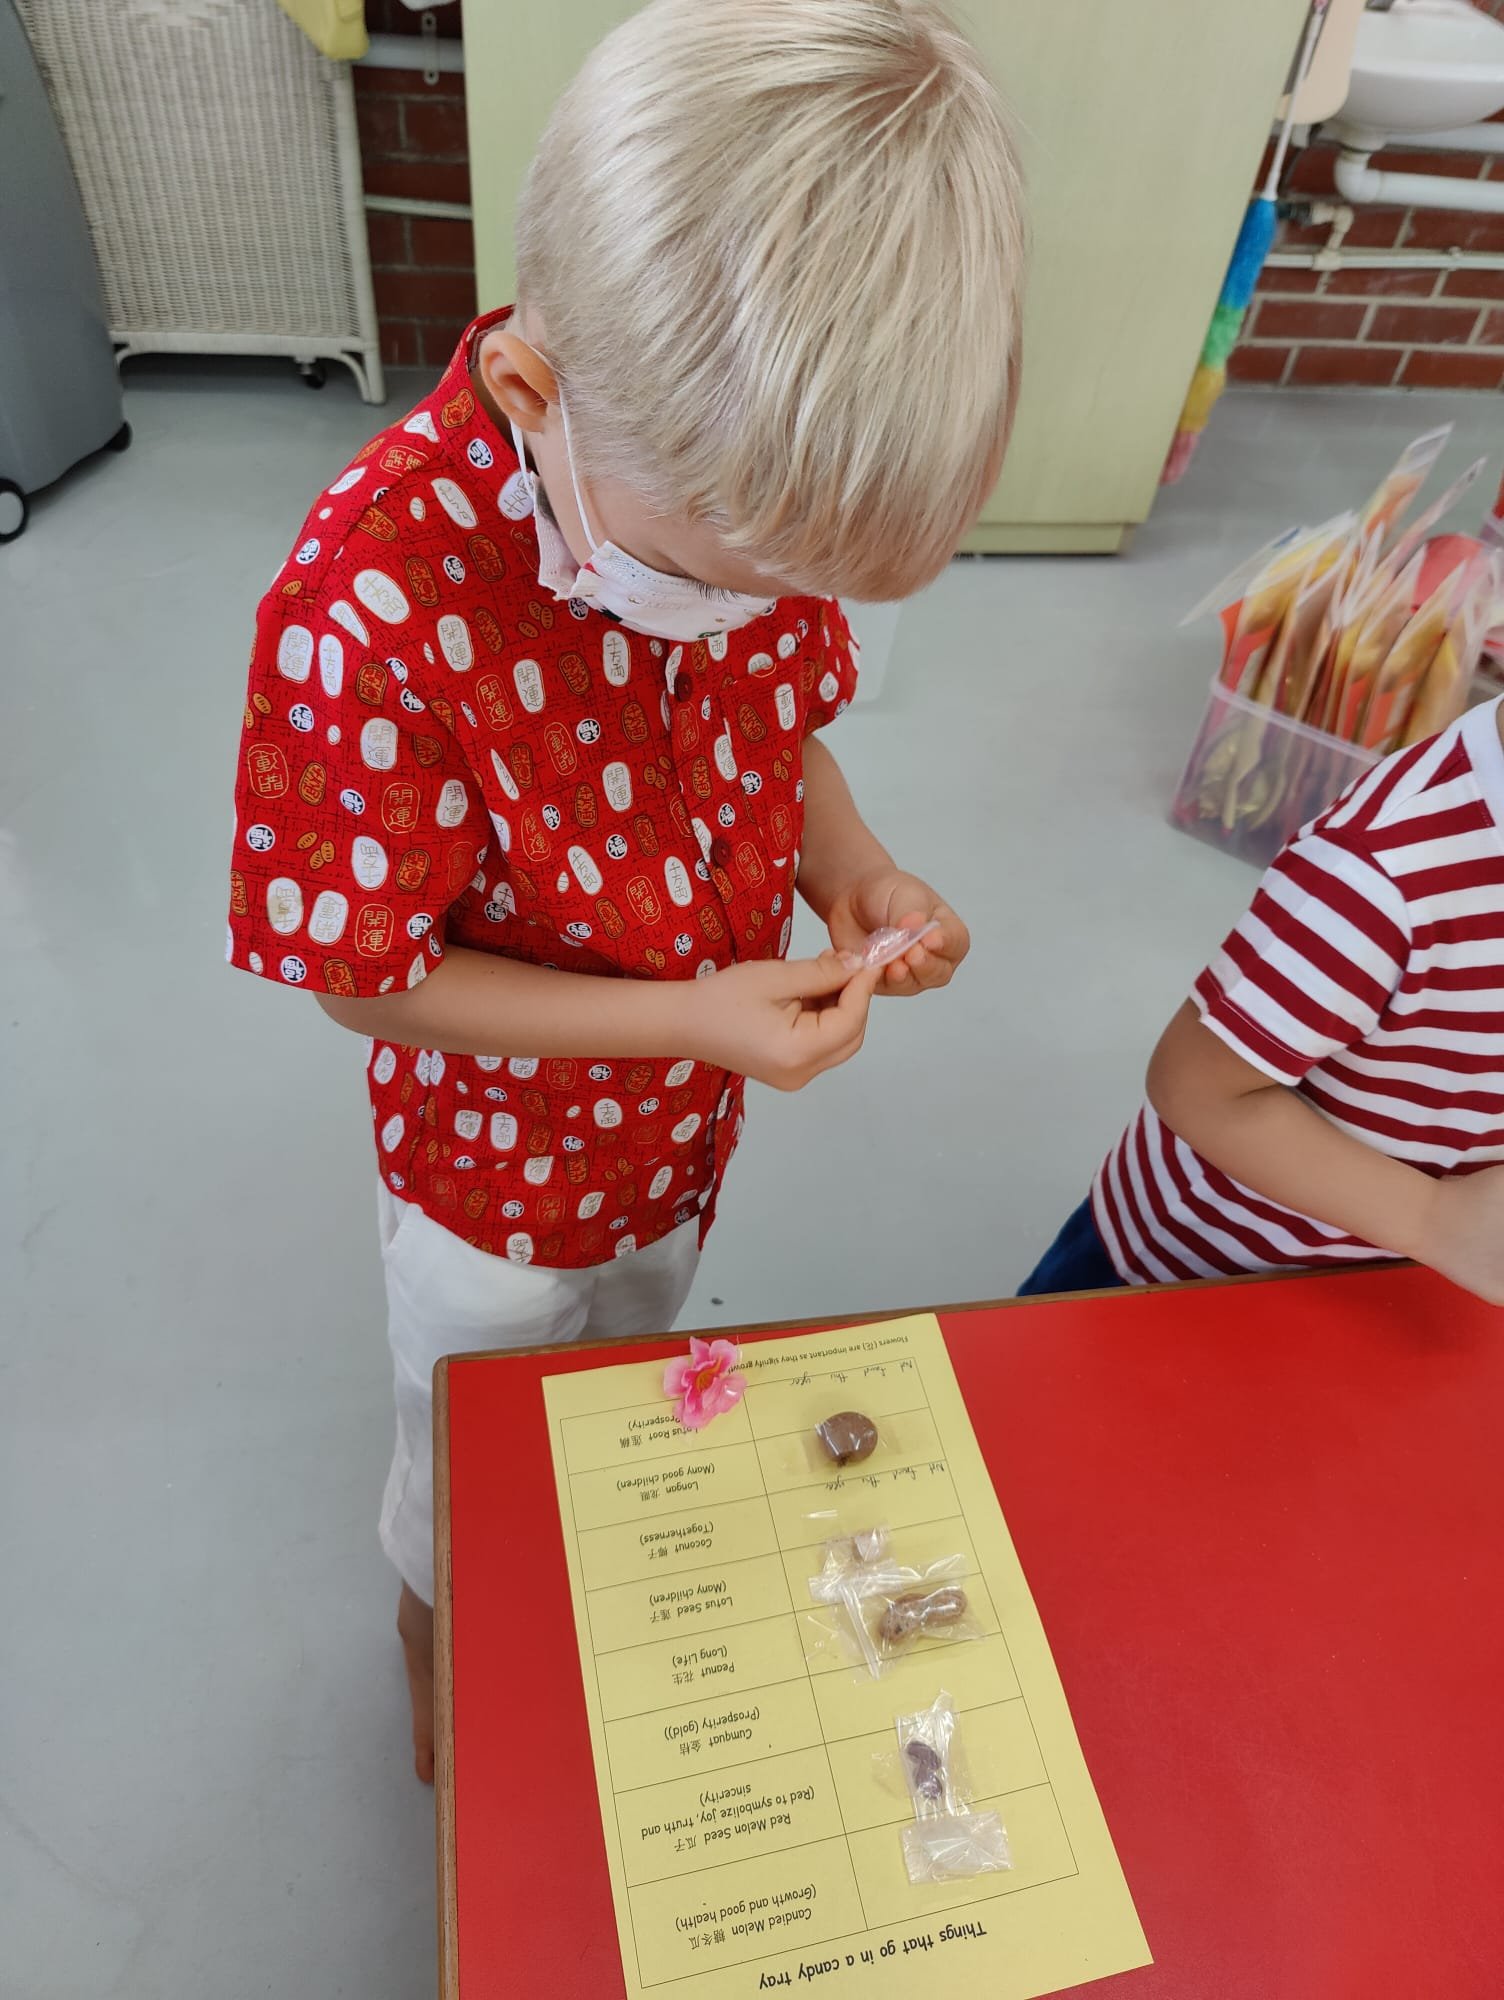  They collected things from the candy tray and organised it on a list for themselves. 